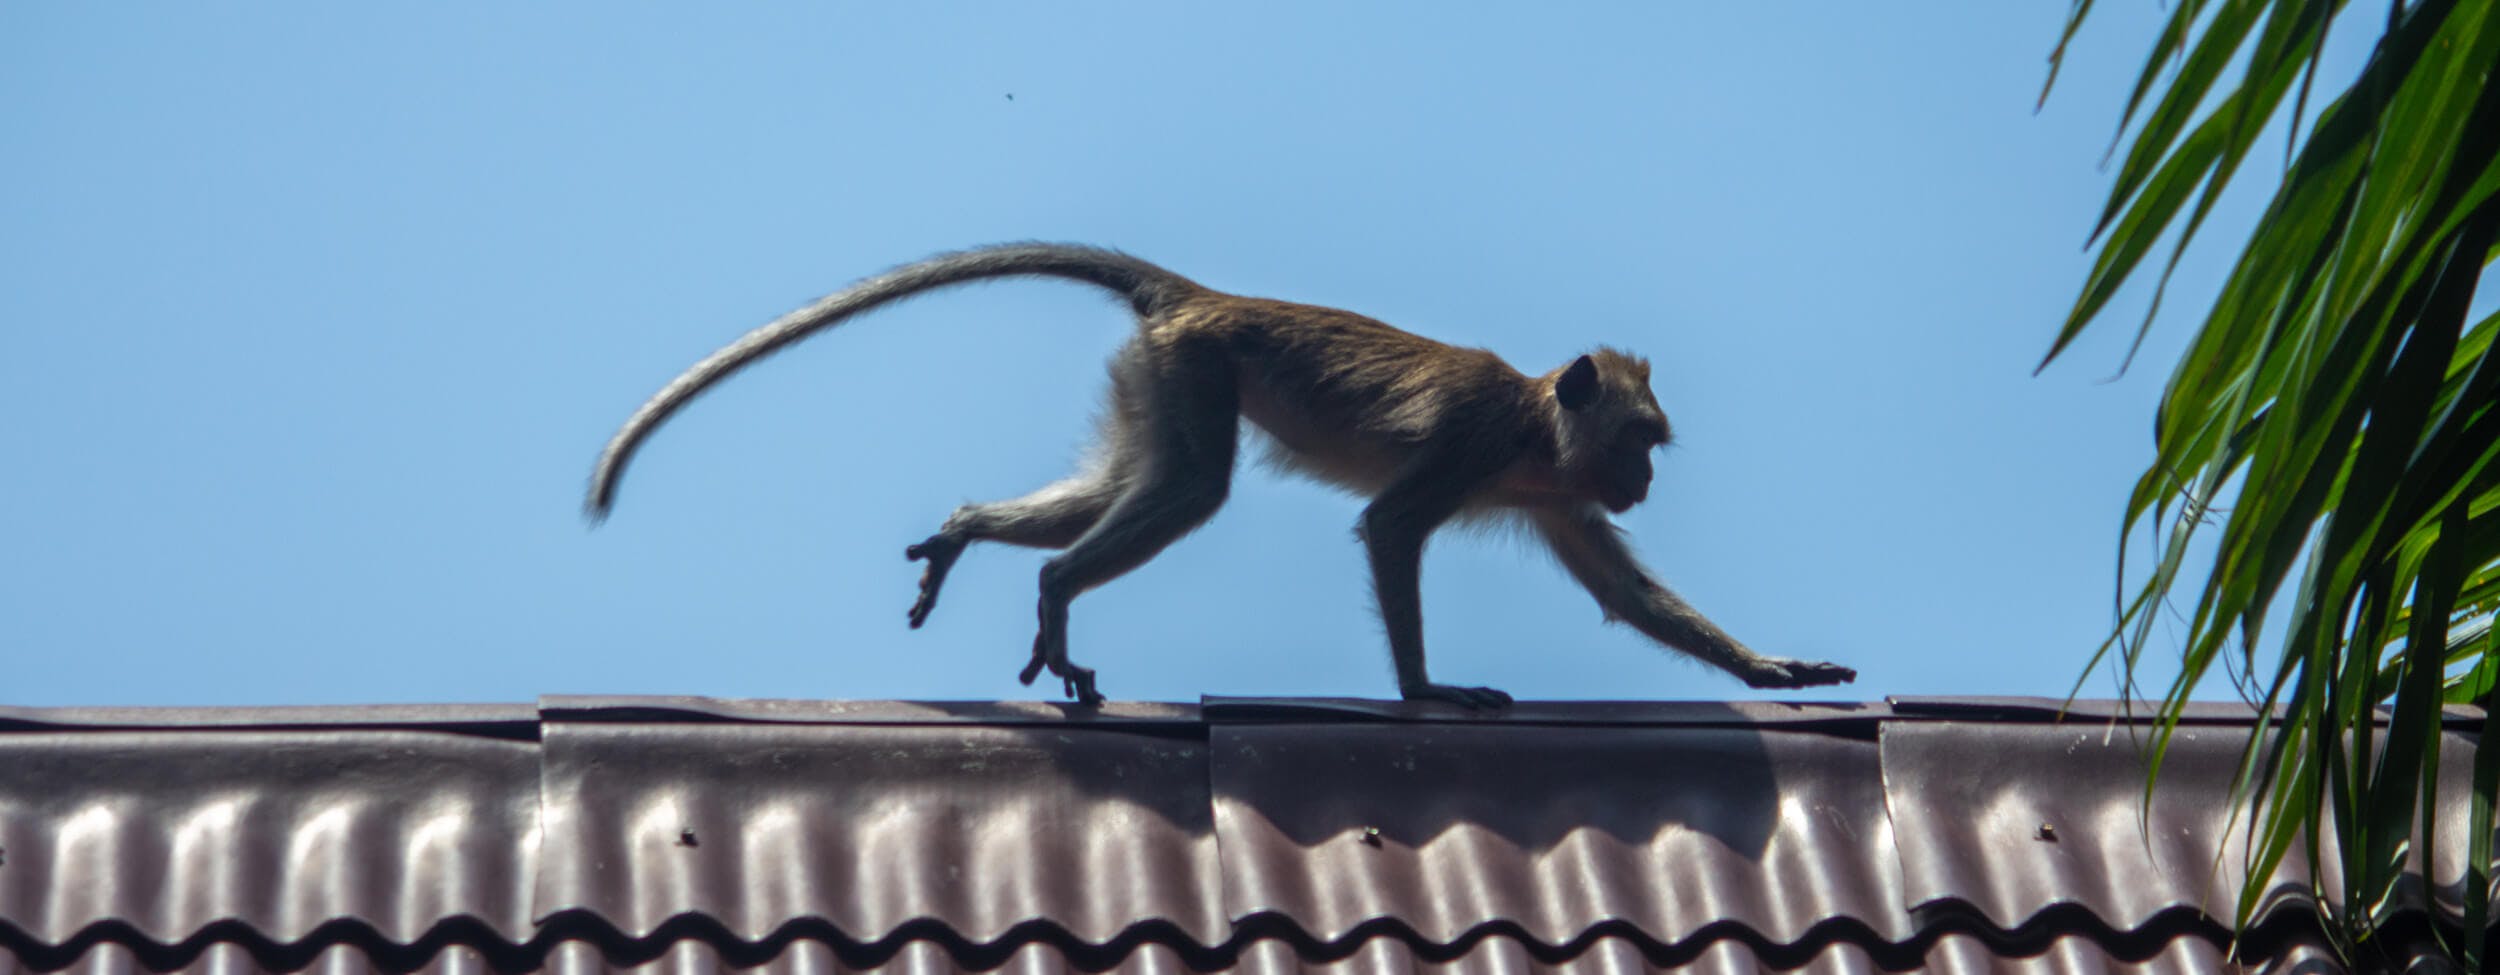 A monkey runs from left to right at the top of the ceiling of a bungalow. in Koh Lanta, Thailand,